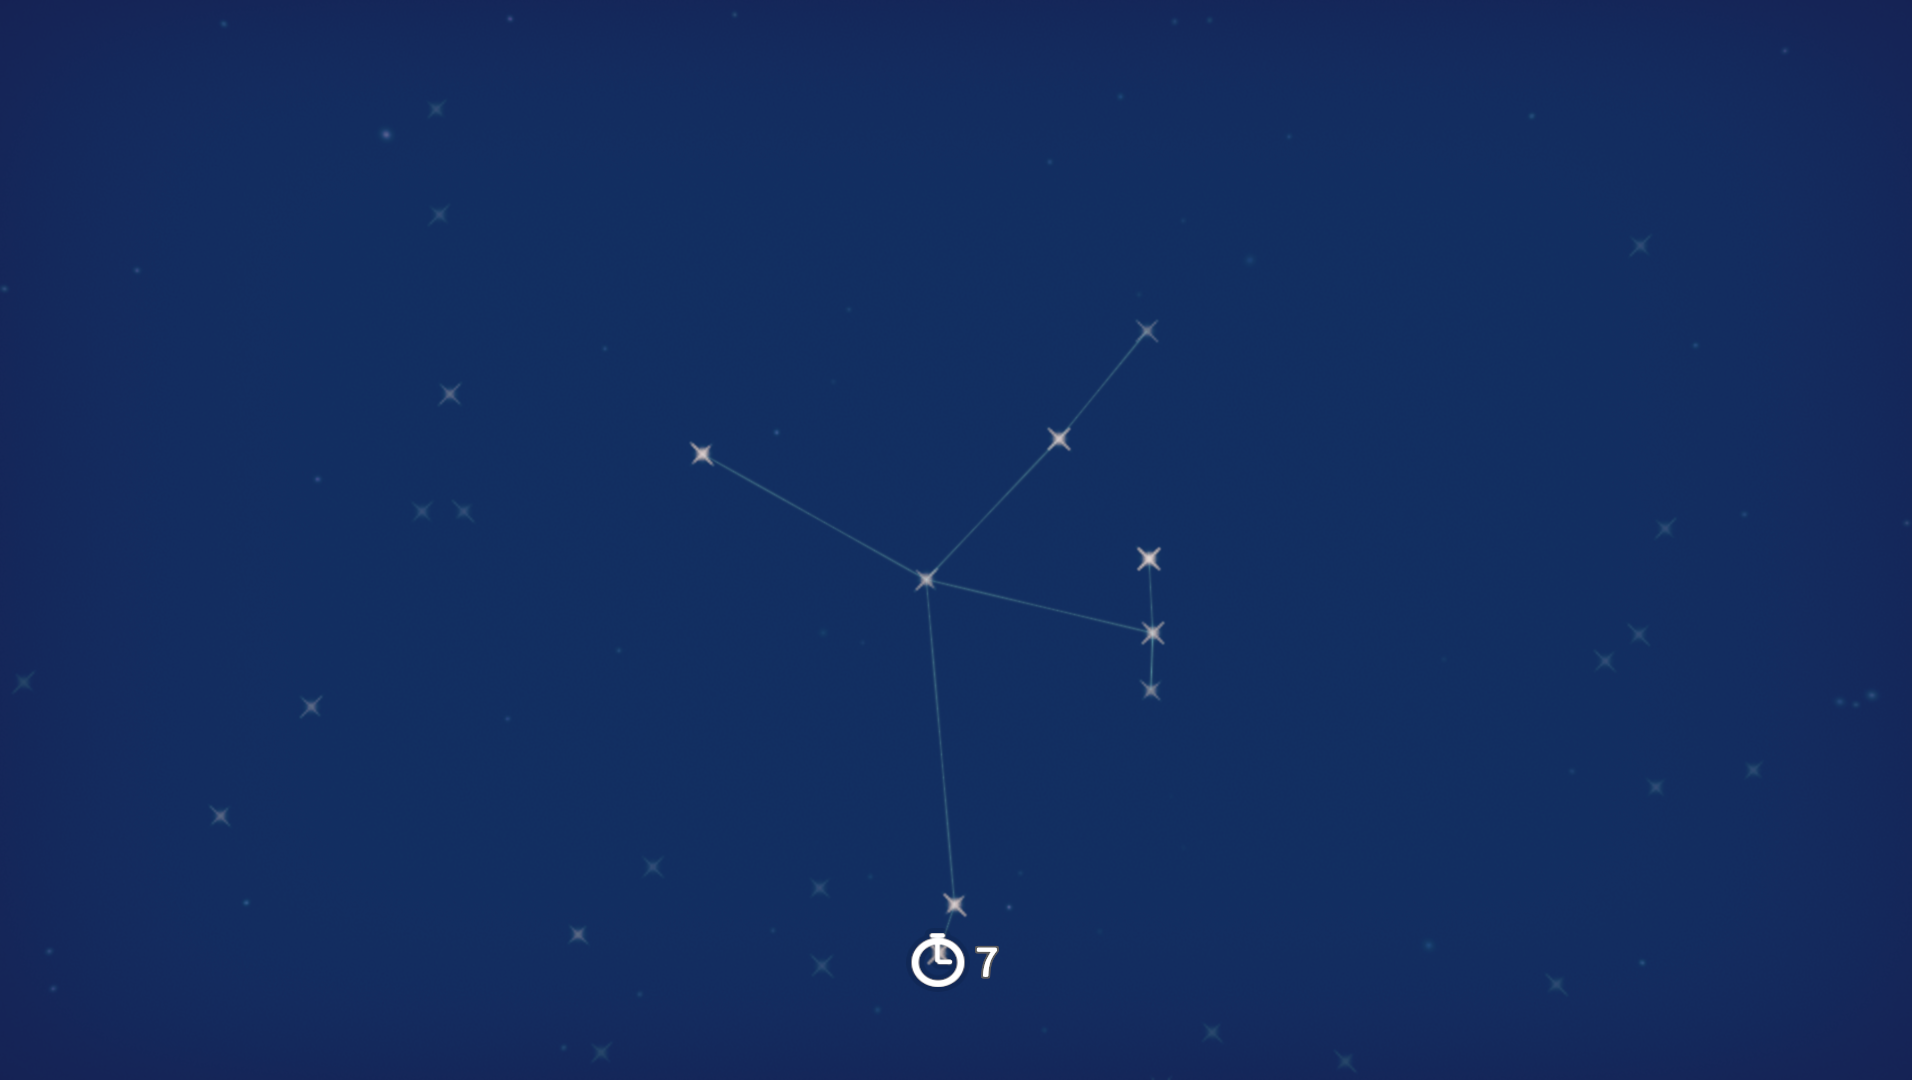 My Time At Portia [Astronomer] Achievement Guide